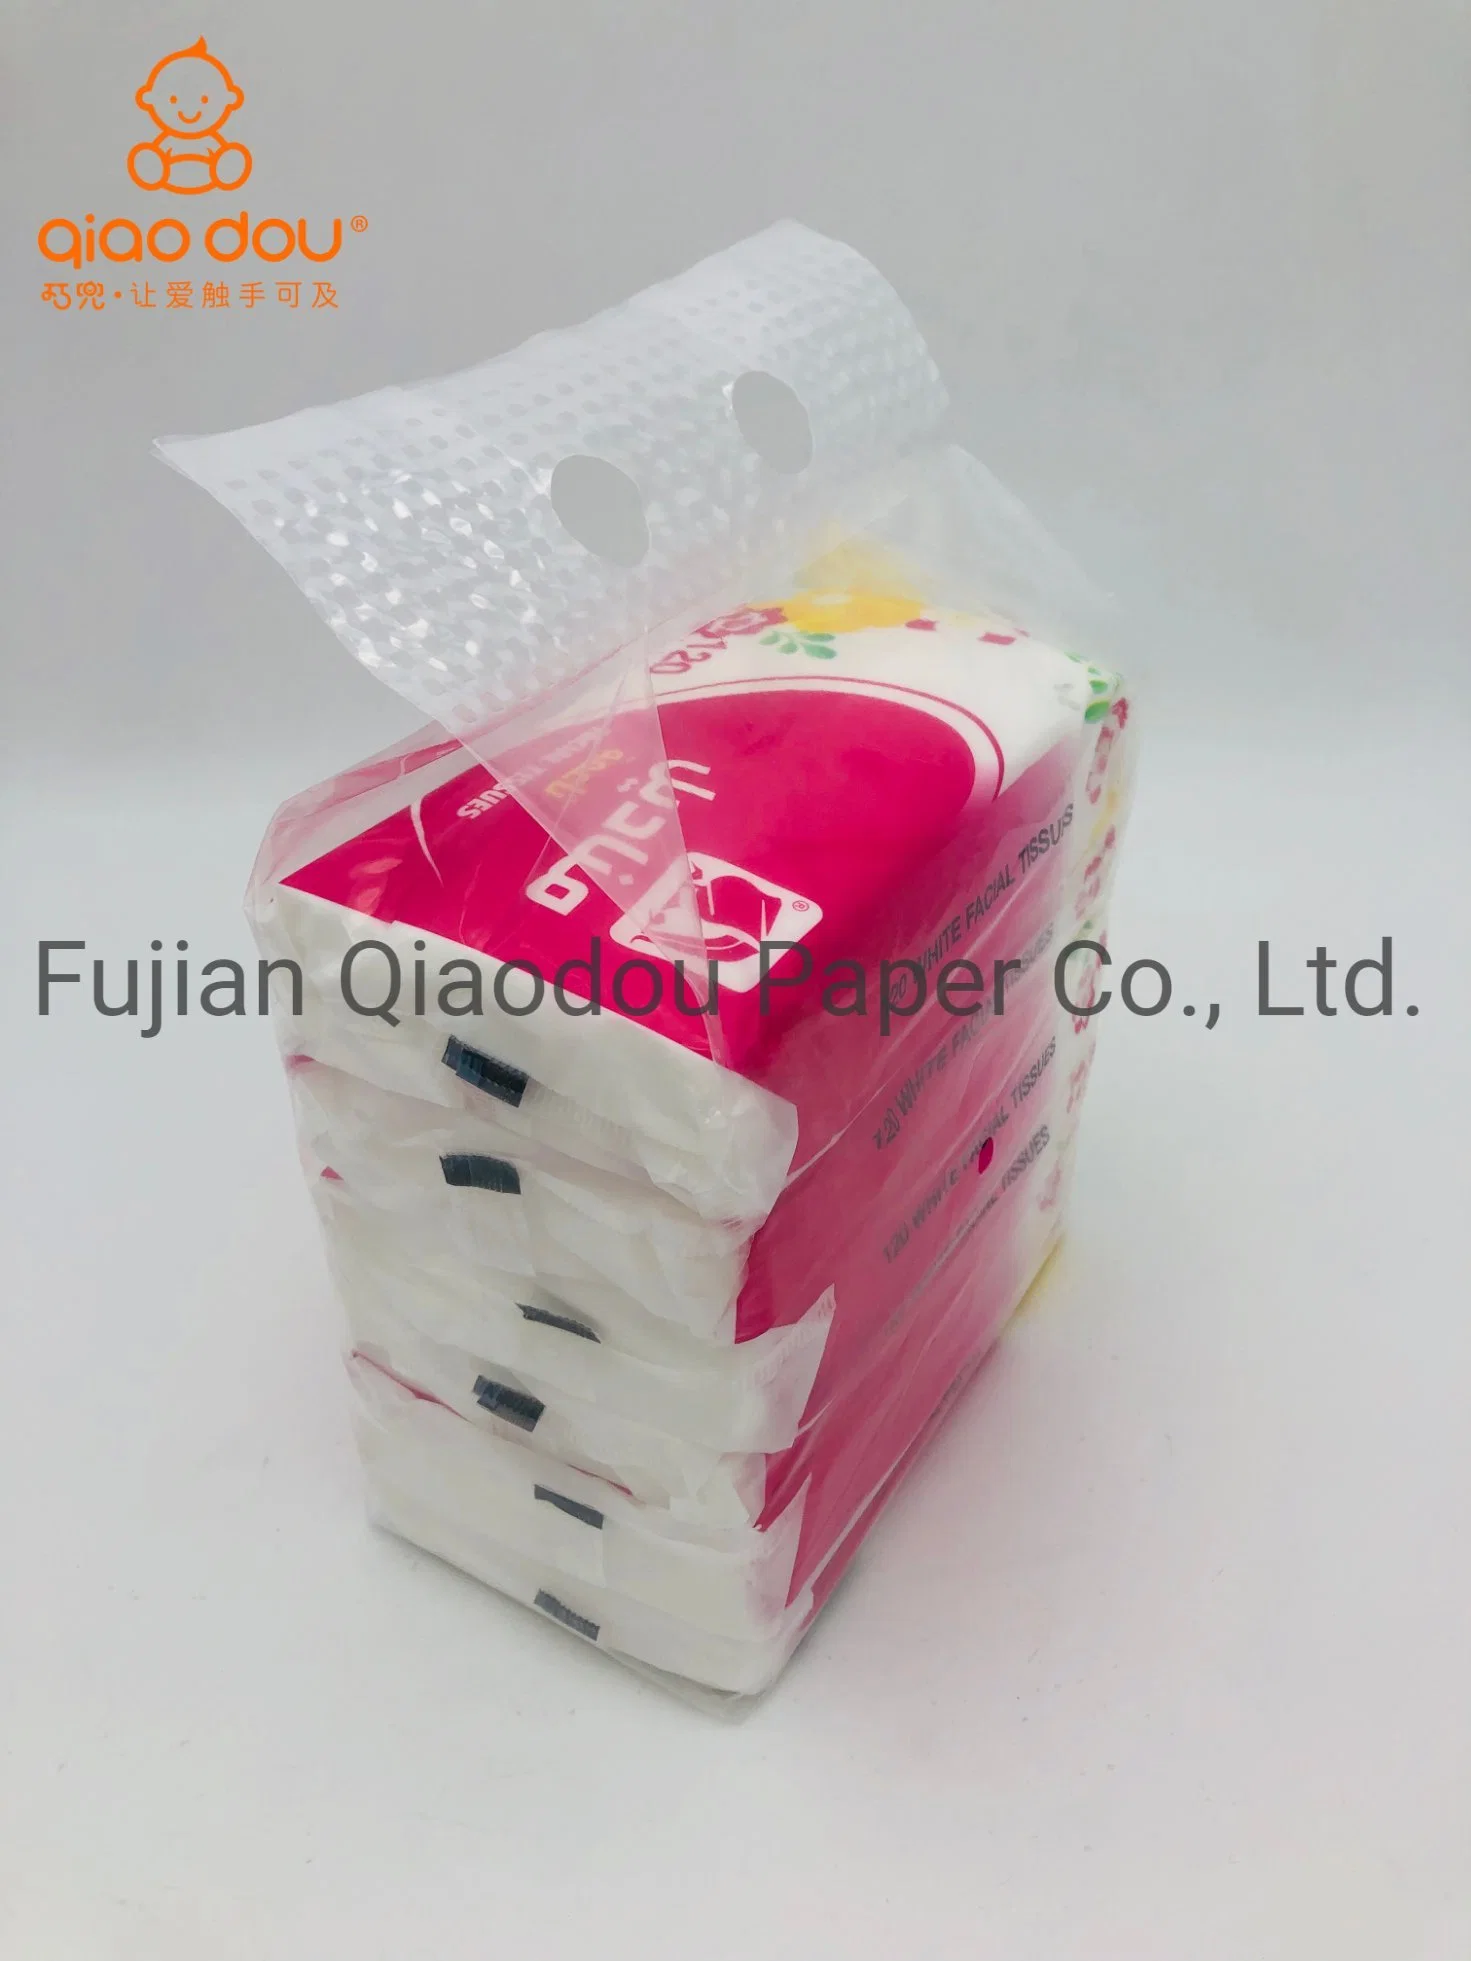 Qiaodou Export to Middle East Limited Discount Facial Paper النسيج